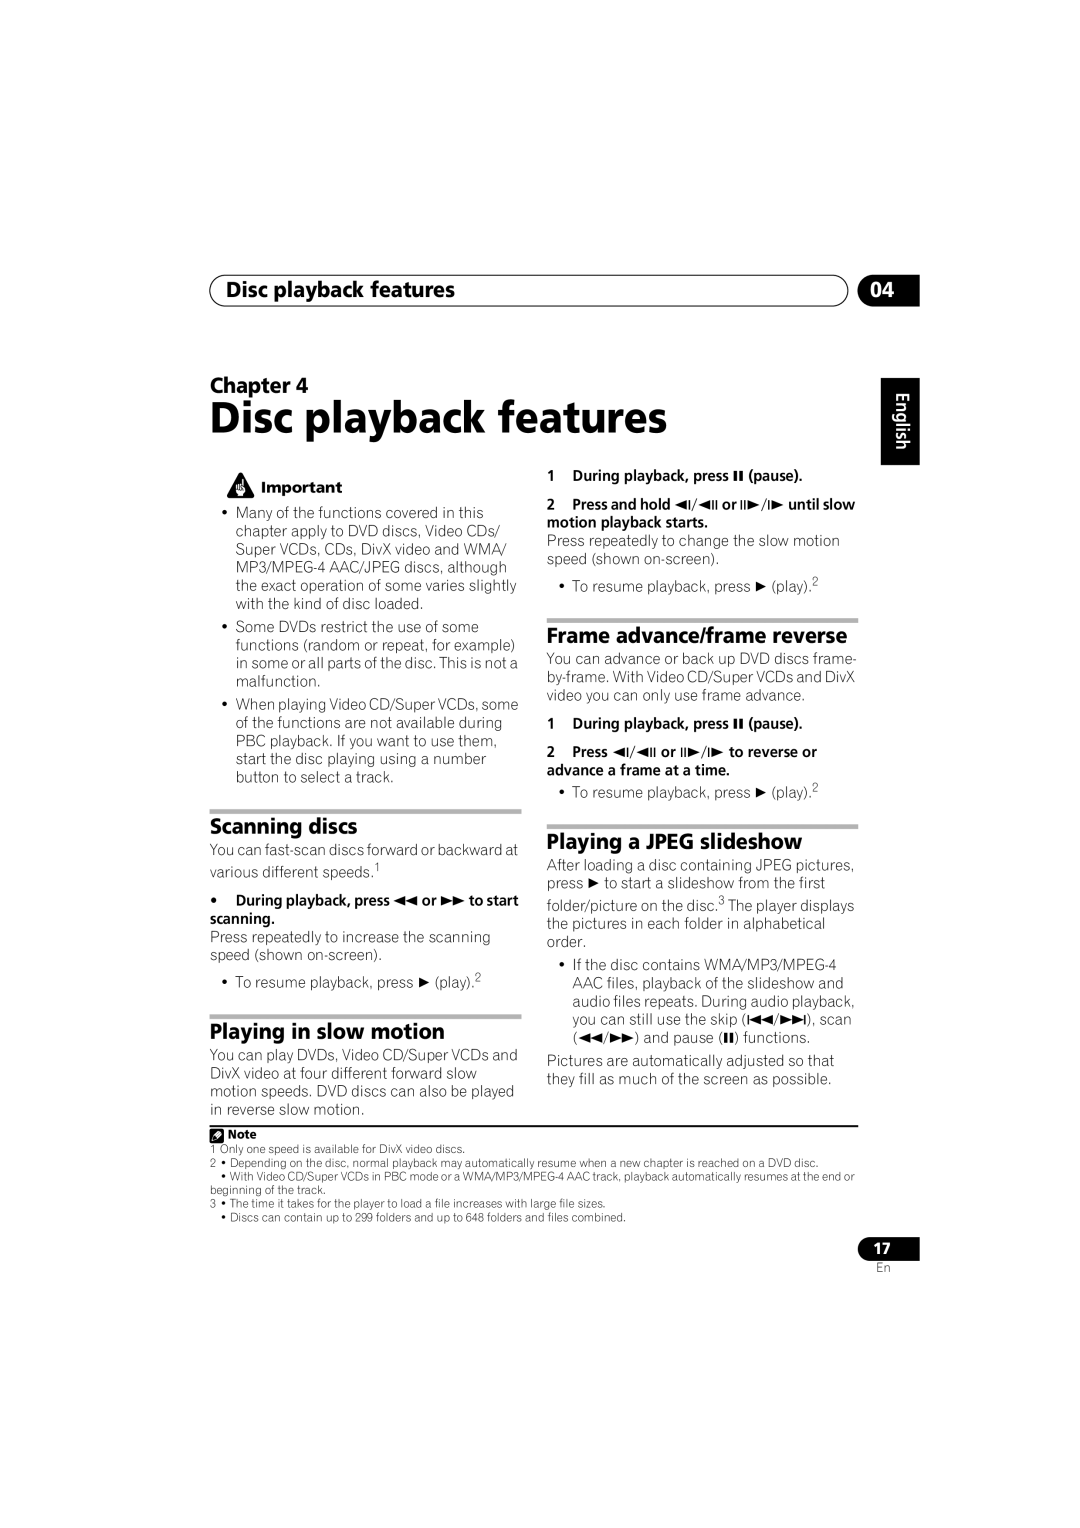 Pioneer HTZ-360DV Disc playback features Chapter, Frame advance/frame reverse, Scanning discs, Playing in slow motion 